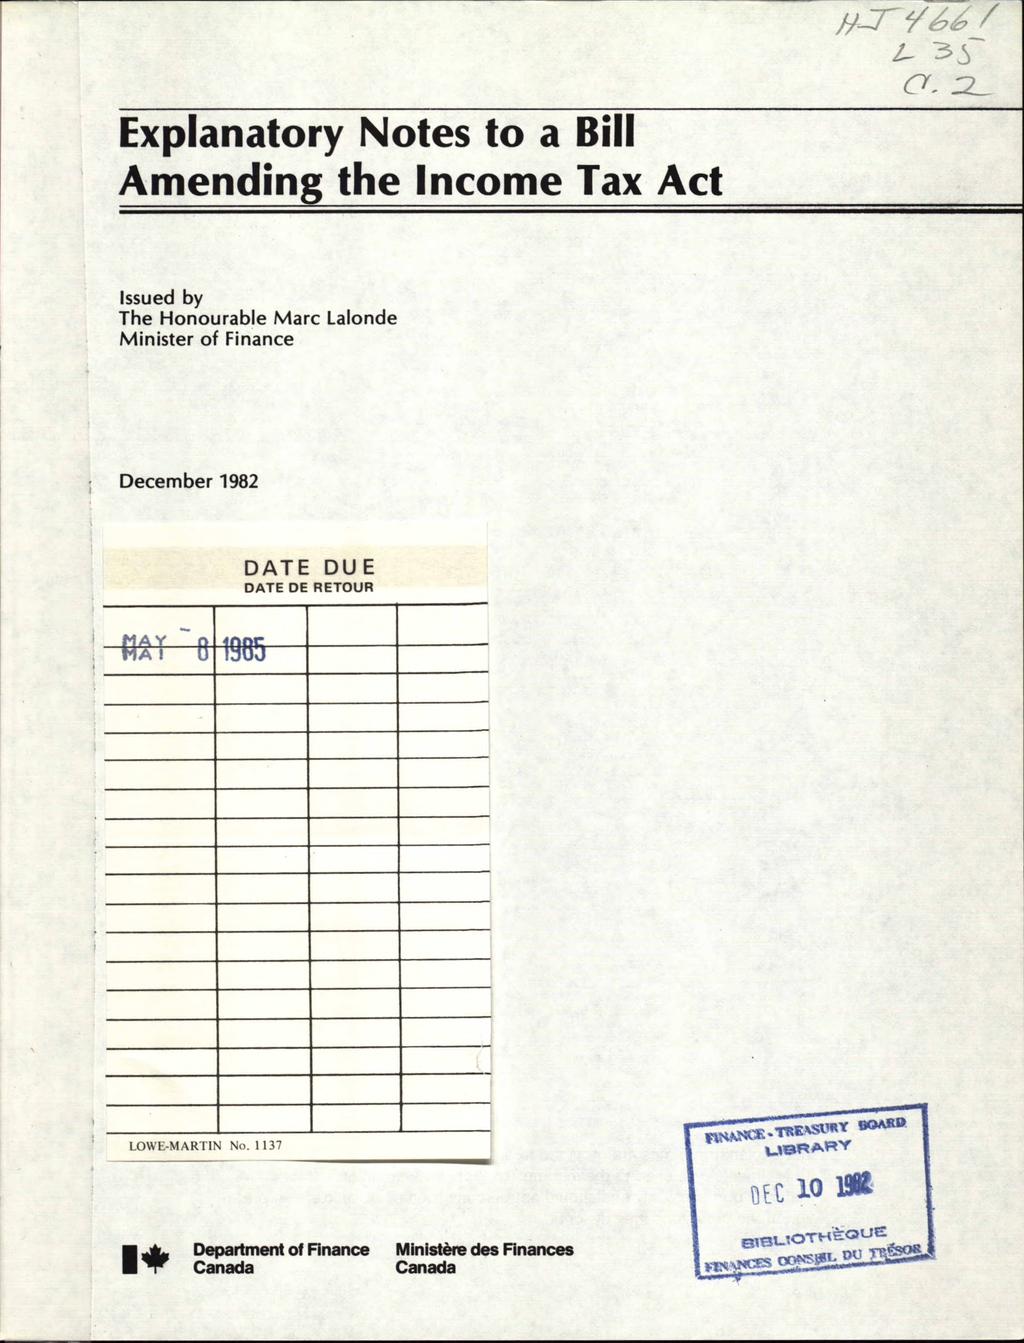 -- H-7 / 33--- Explanatory Notes to a Bill Amending the Income Tax Act Issued by The Honourable Marc Lalonde Minister of Finance December 1982 DATE DUE DATE DE RETOUR ti A Y VI A